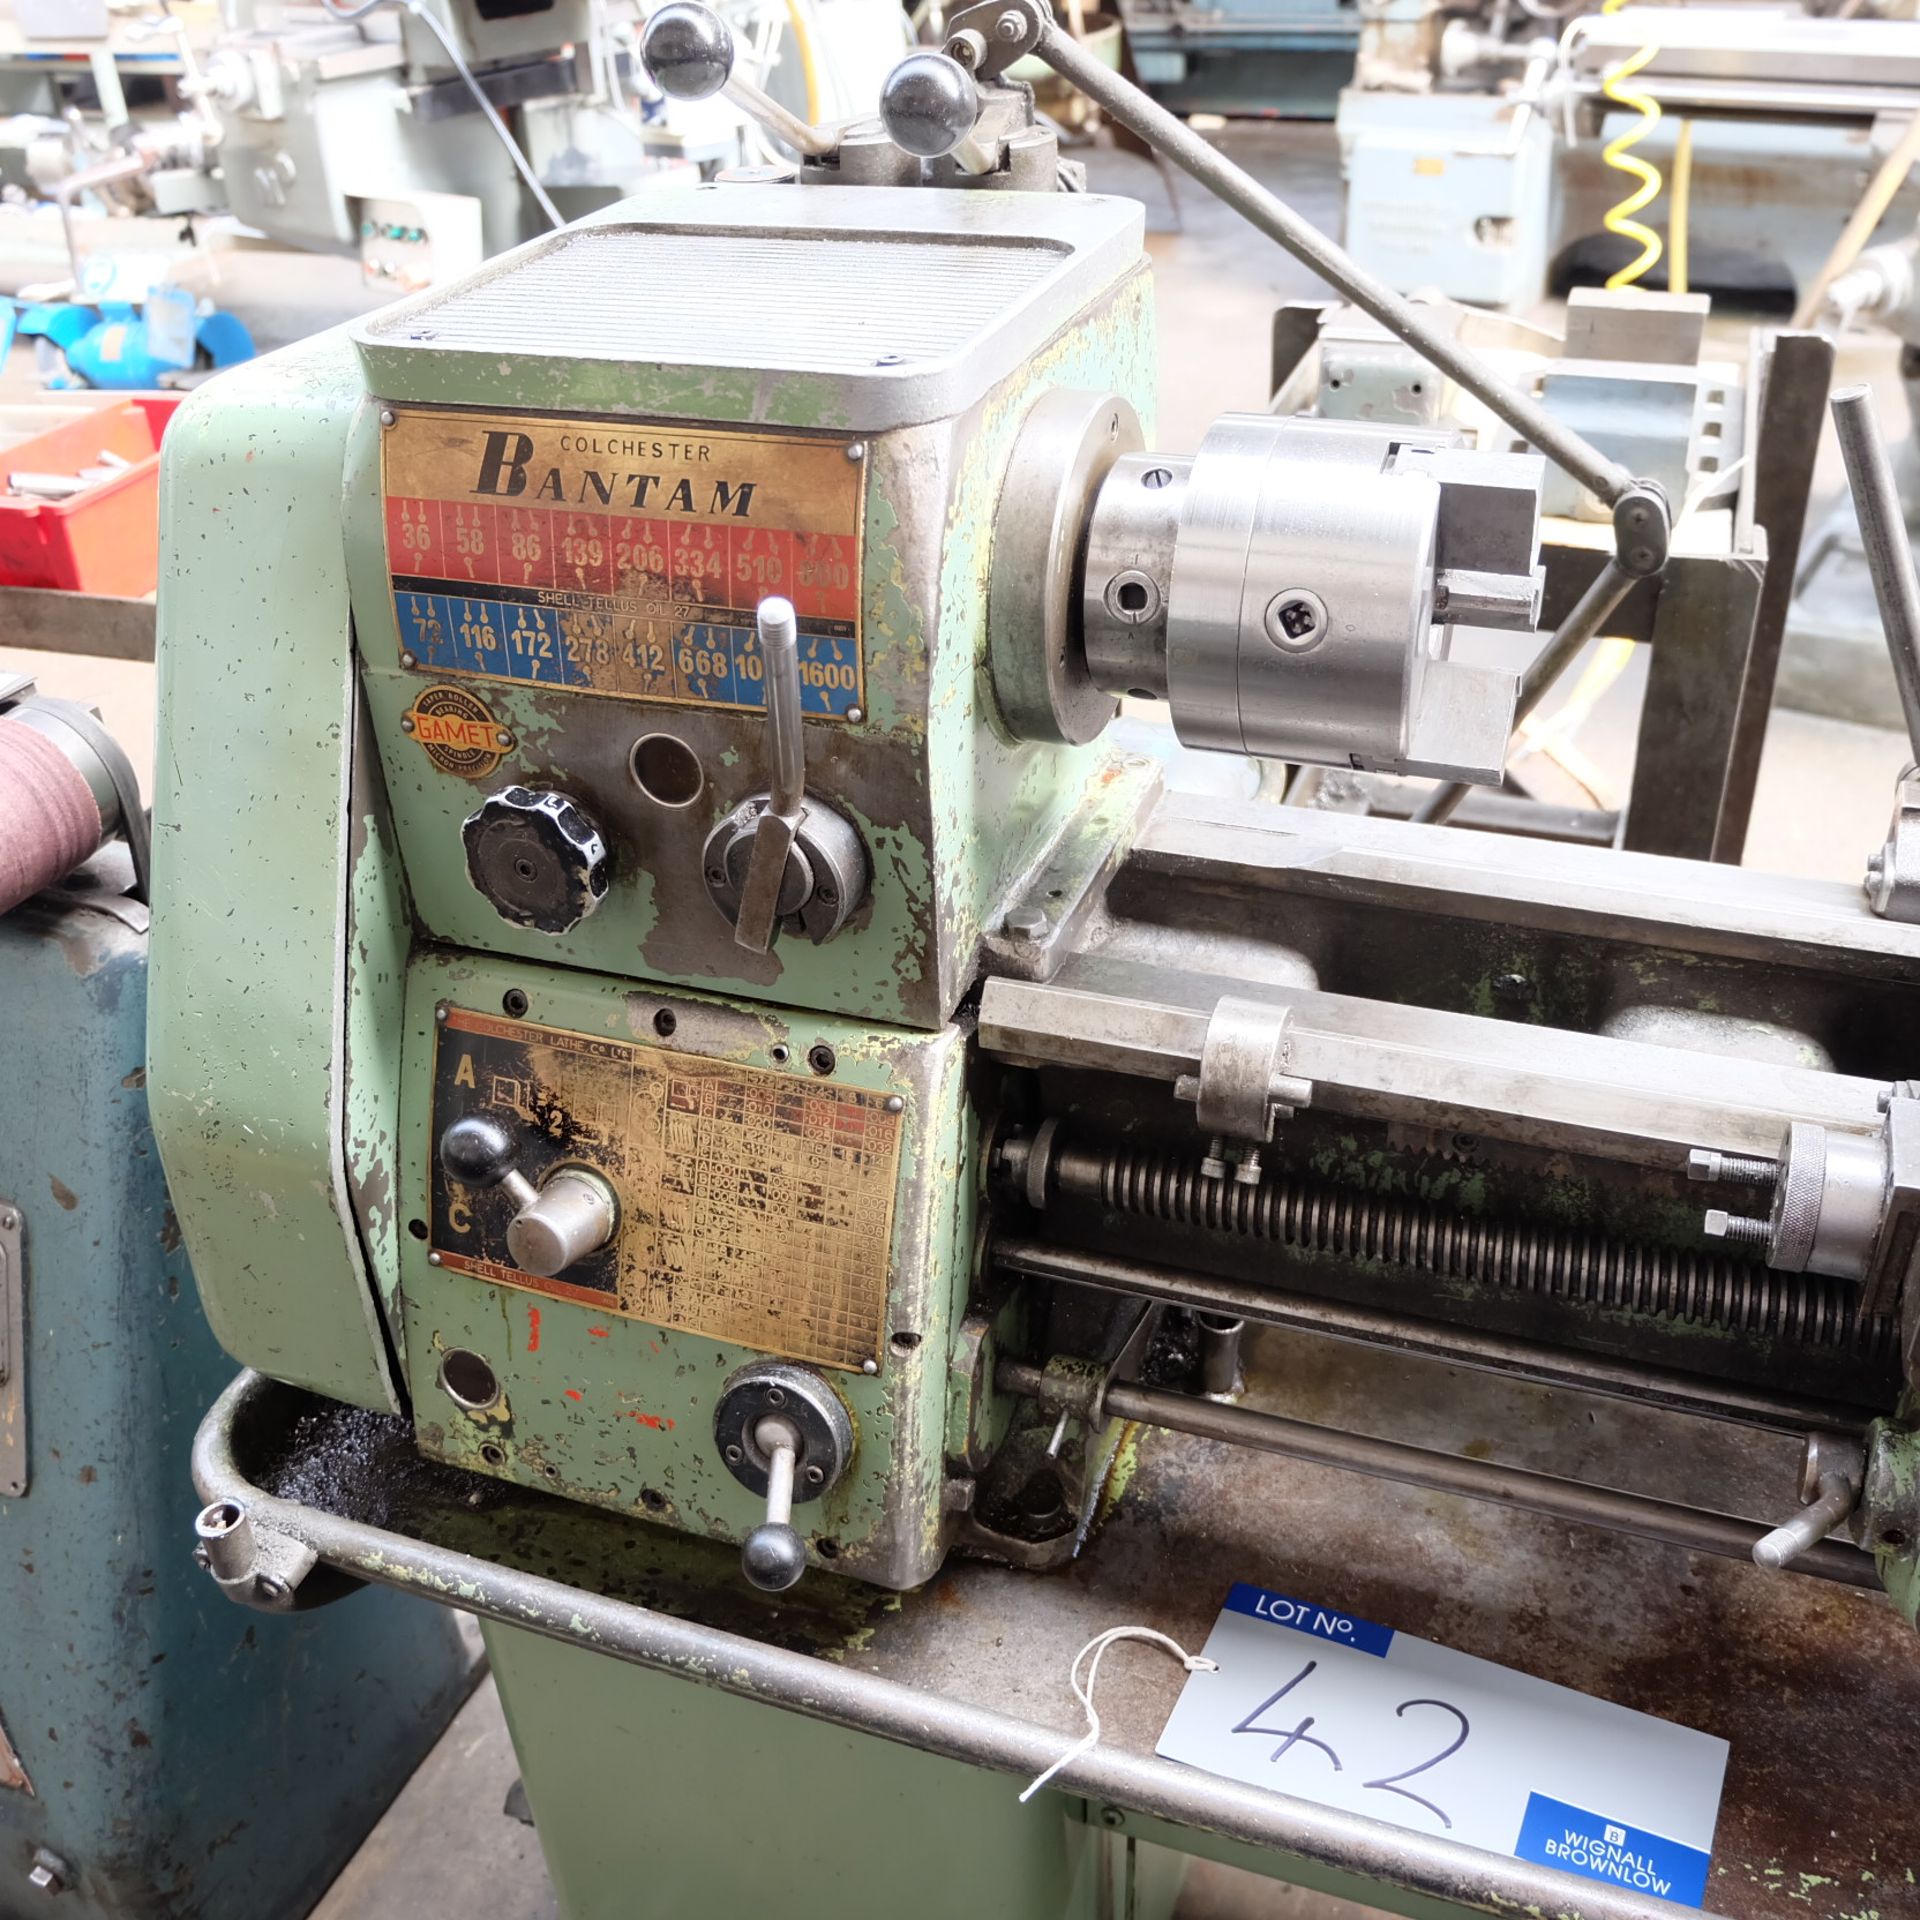 A Colchester Bantam 1600 SS and SC Lathe, 11in swing x 20in centres with fixed and travelling - Image 2 of 4